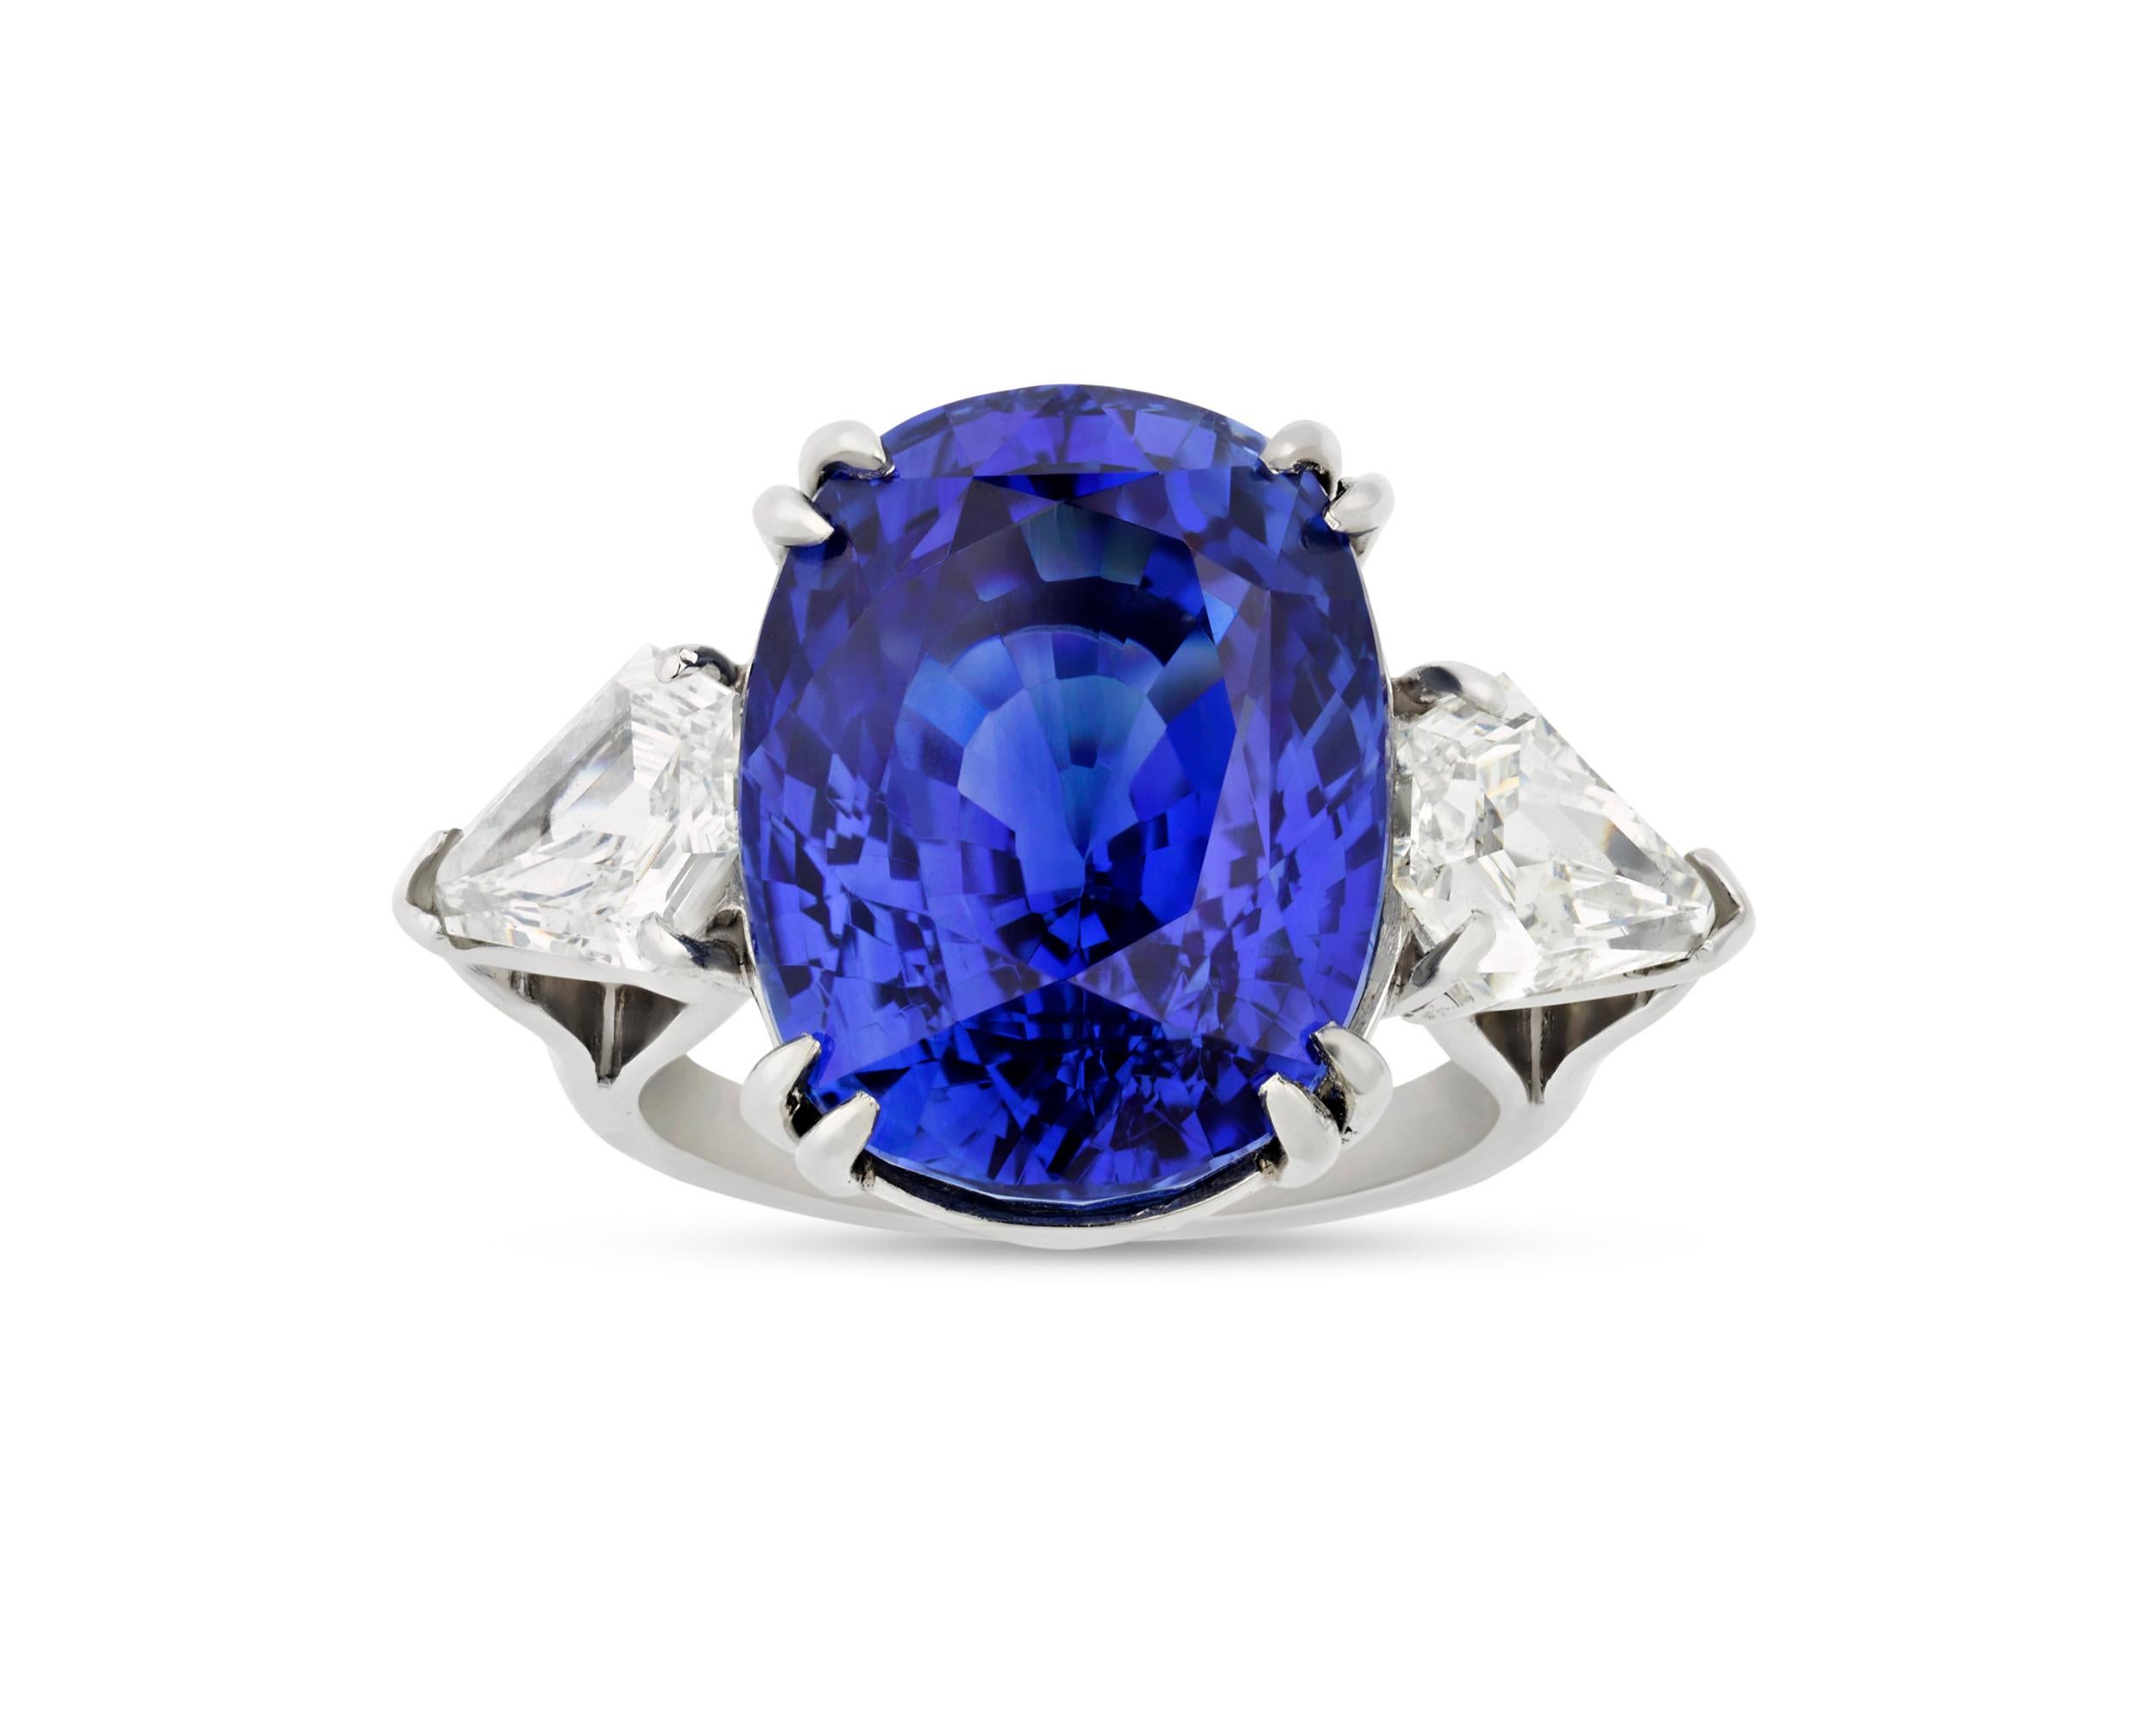 Oval Cut Ceylon Sapphire Ring, 19.71 Carats For Sale